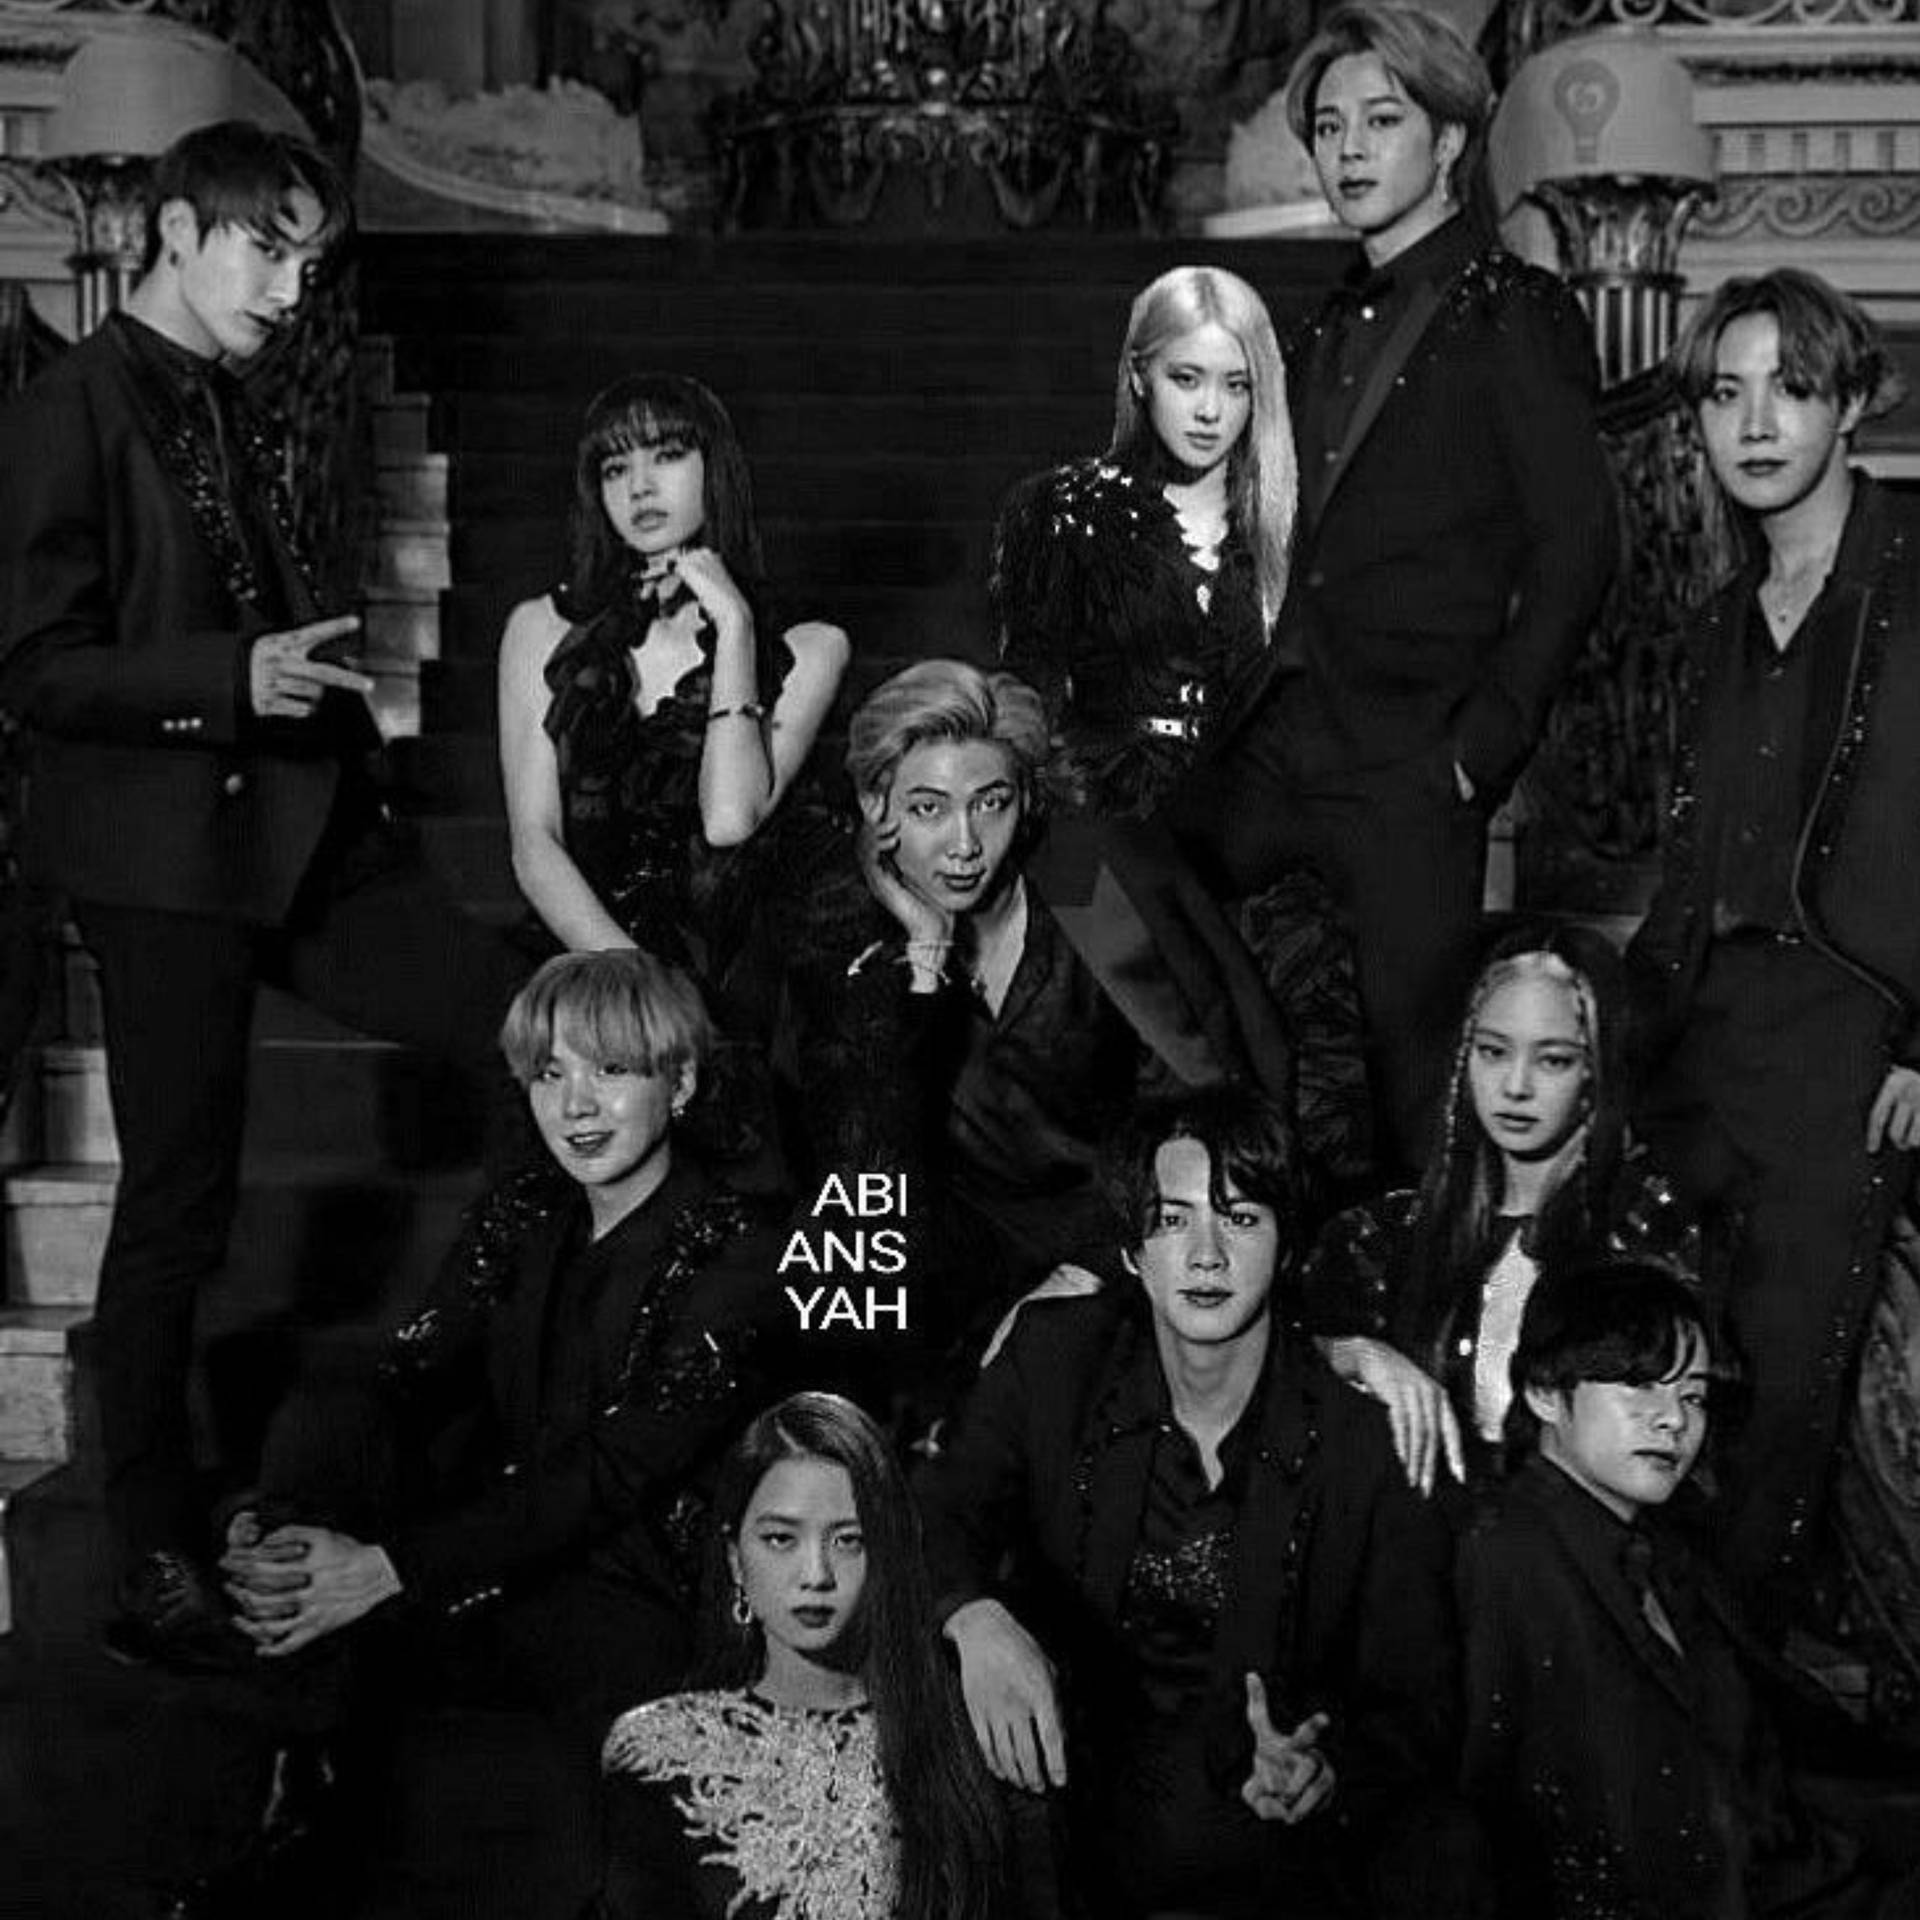 Bts And Blackpink In Grand Staircase Background